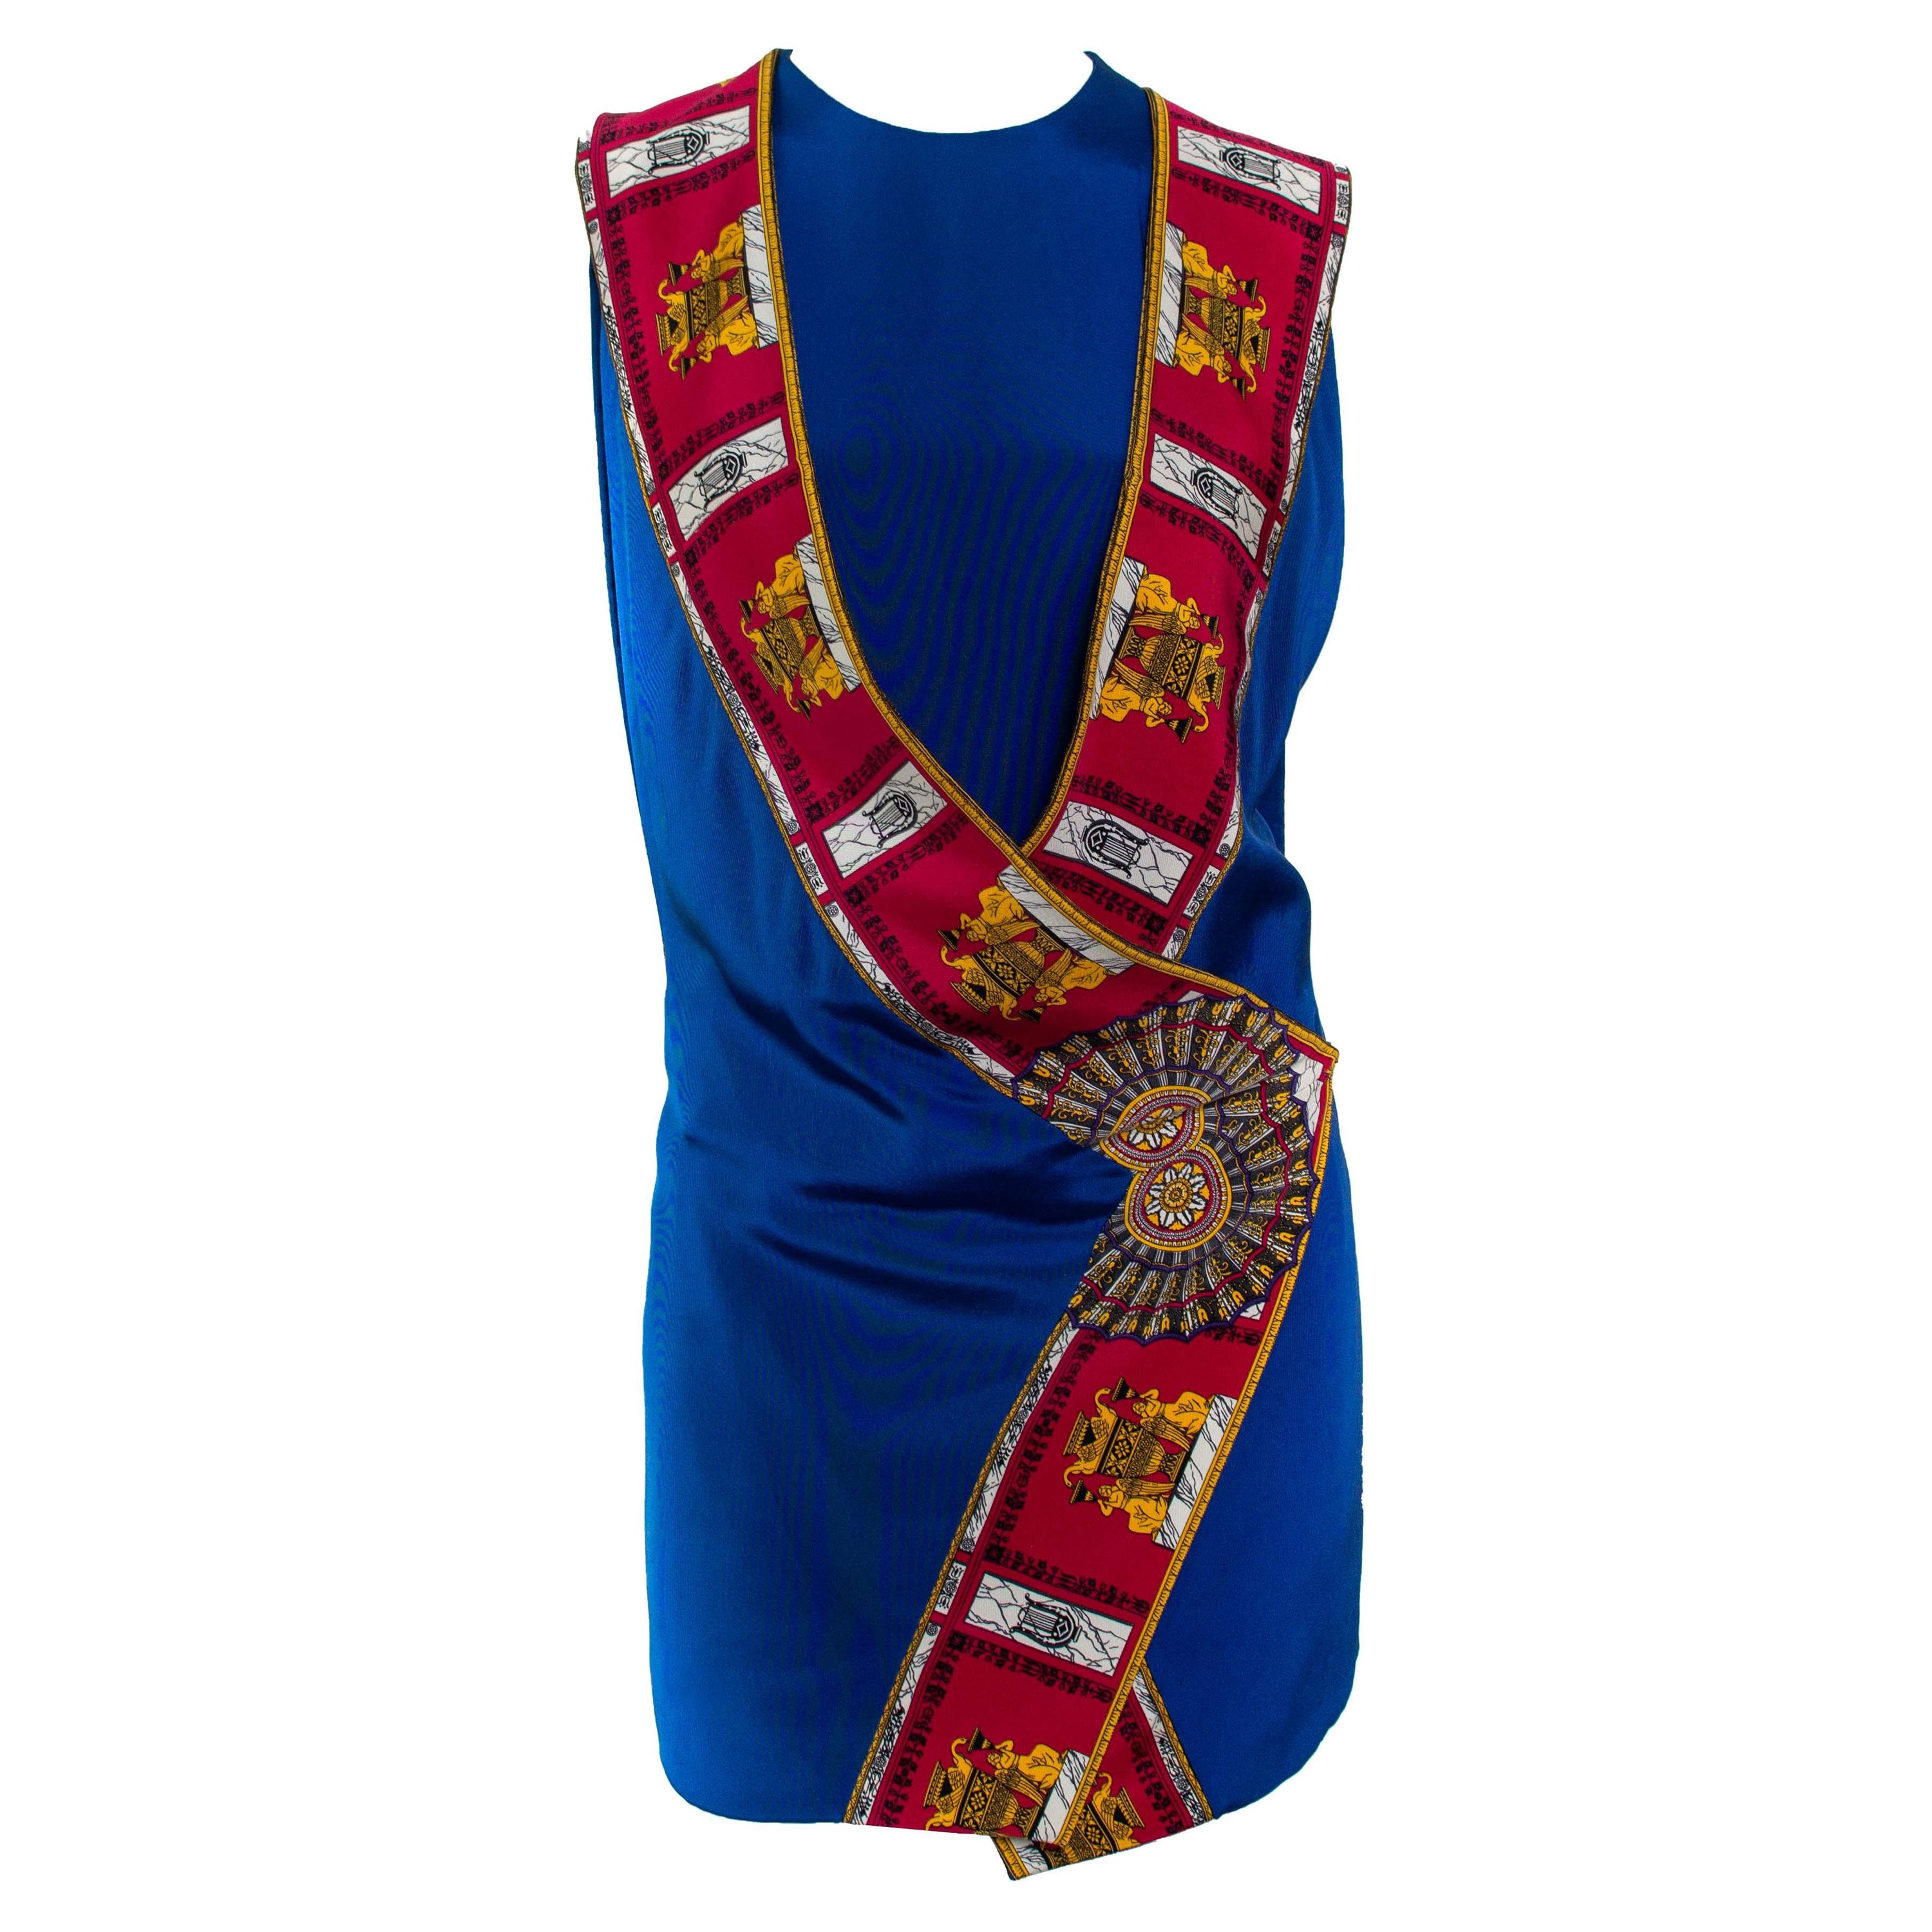 S/S 1991 Atelier Versace by Gianni Versace Grecian Tunic Two Piece Dress Set